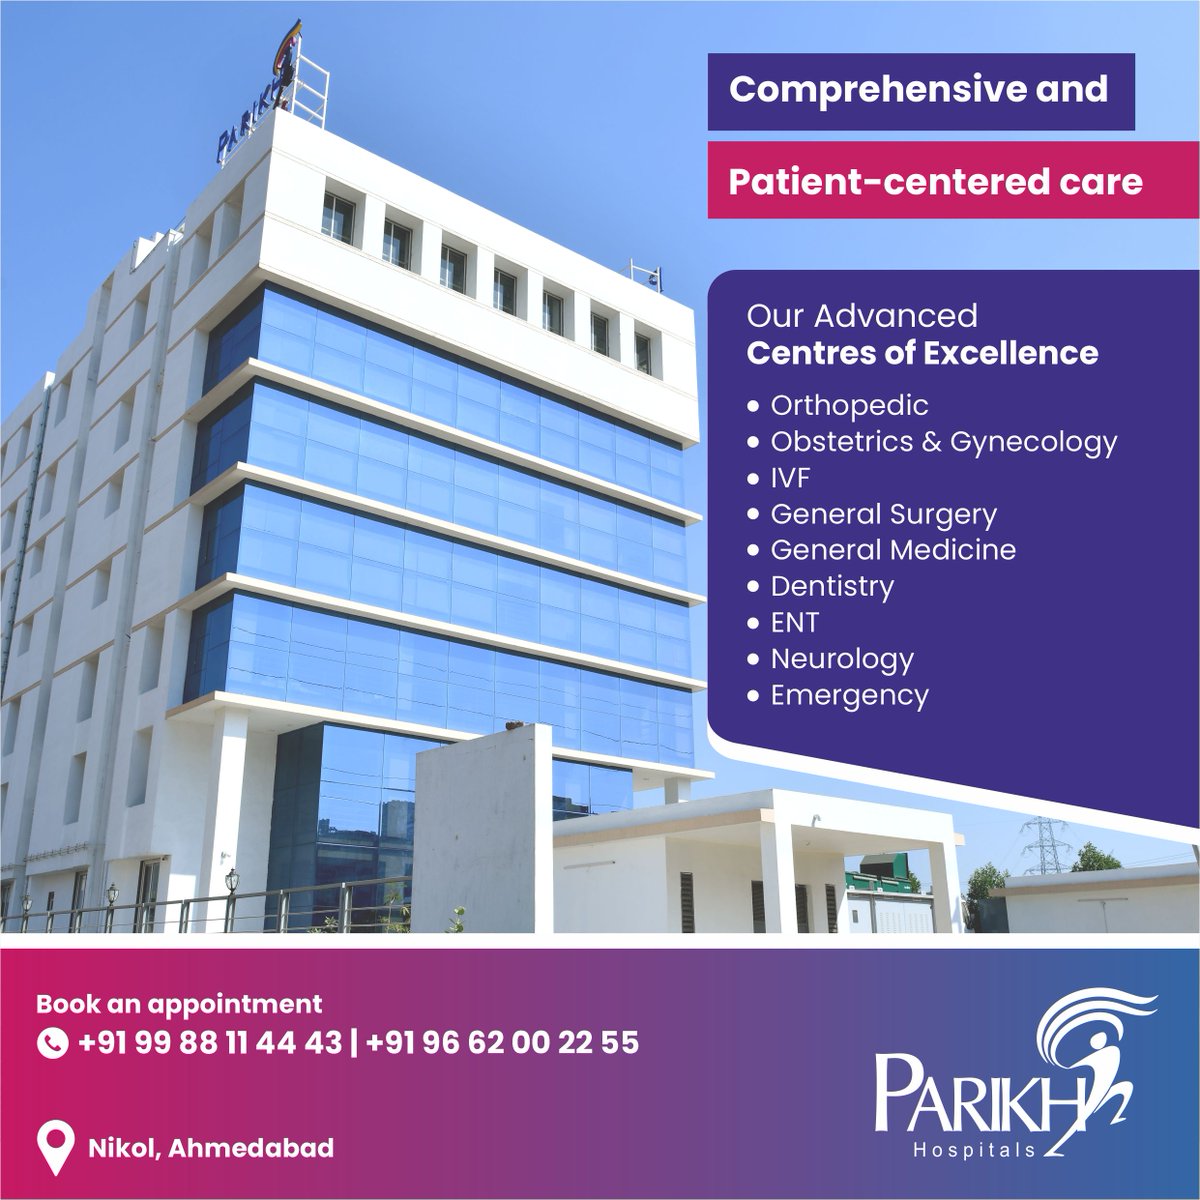 We have designated Centres of Excellence for many core specialties and super specialties at Parikh Hospitals.
.
.
.
#FetalMaternalMedicine #Obstetrics #Gynecology #Neurology #GeneralSurgery #Oral #Maxillofacial #Orthopedics #CenterOfExcellence #GeneralMedicine #Emergency #ent